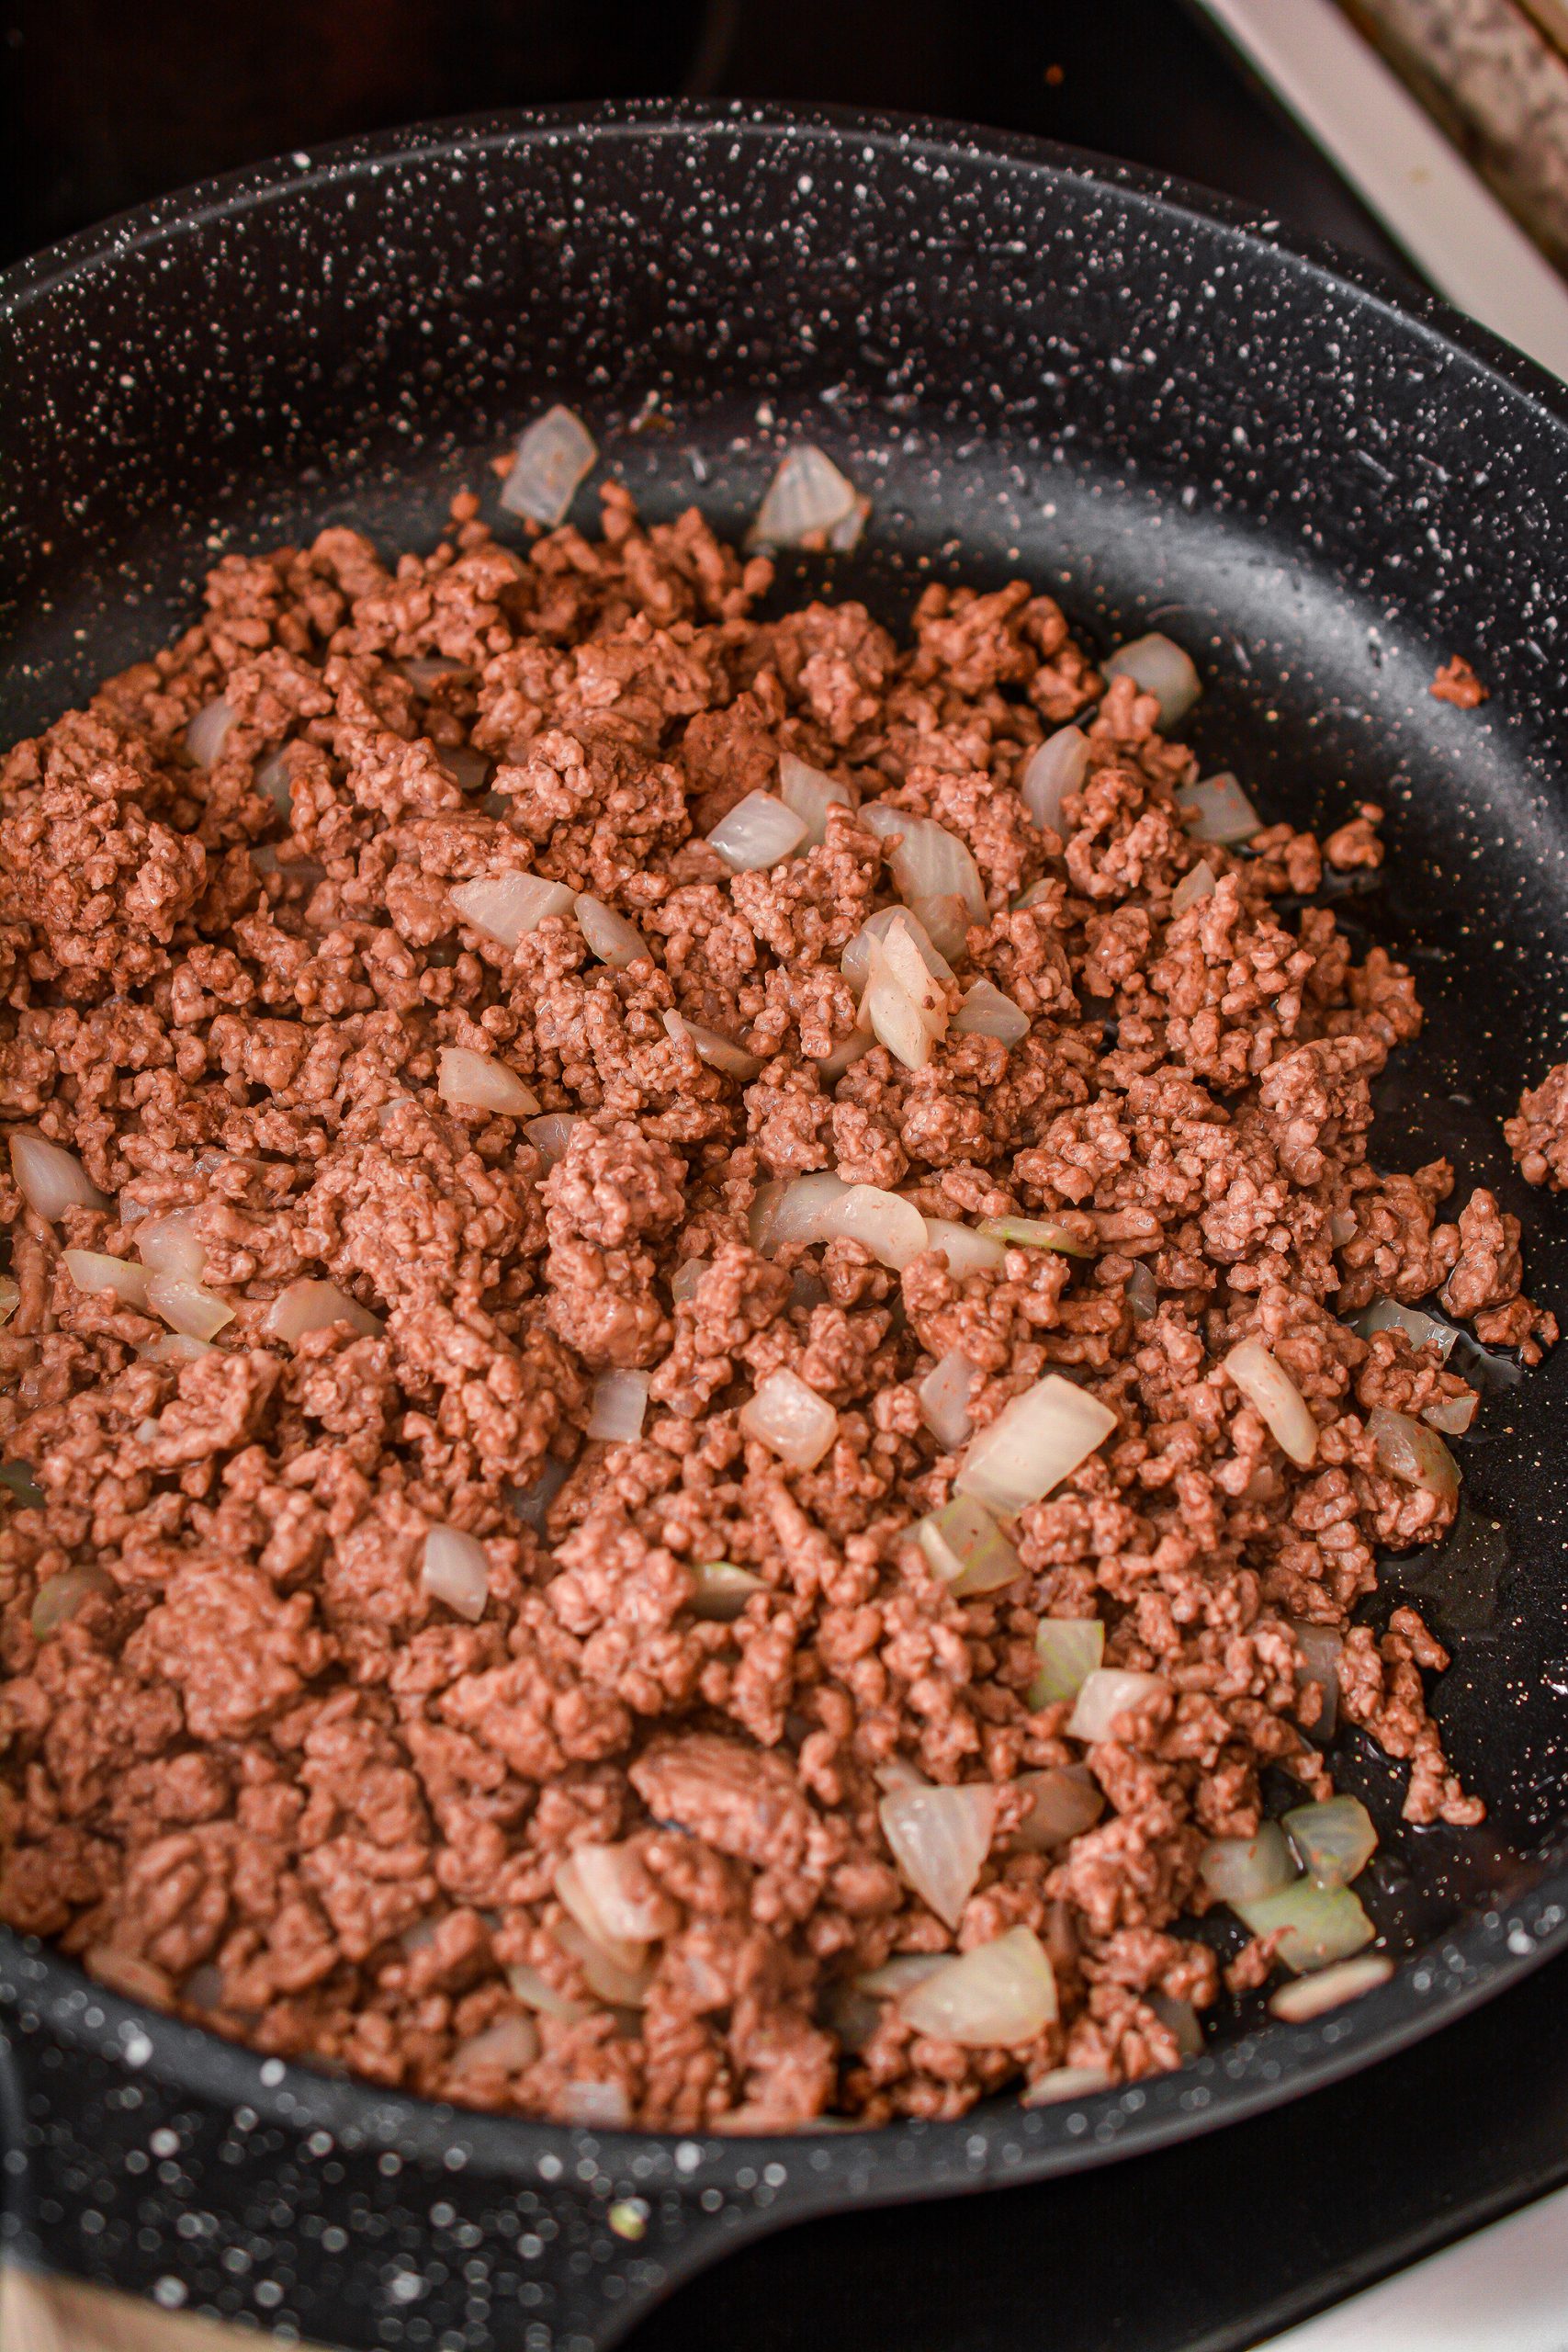 Add the ground beef and onions to a skillet over medium-high heat on the stove.